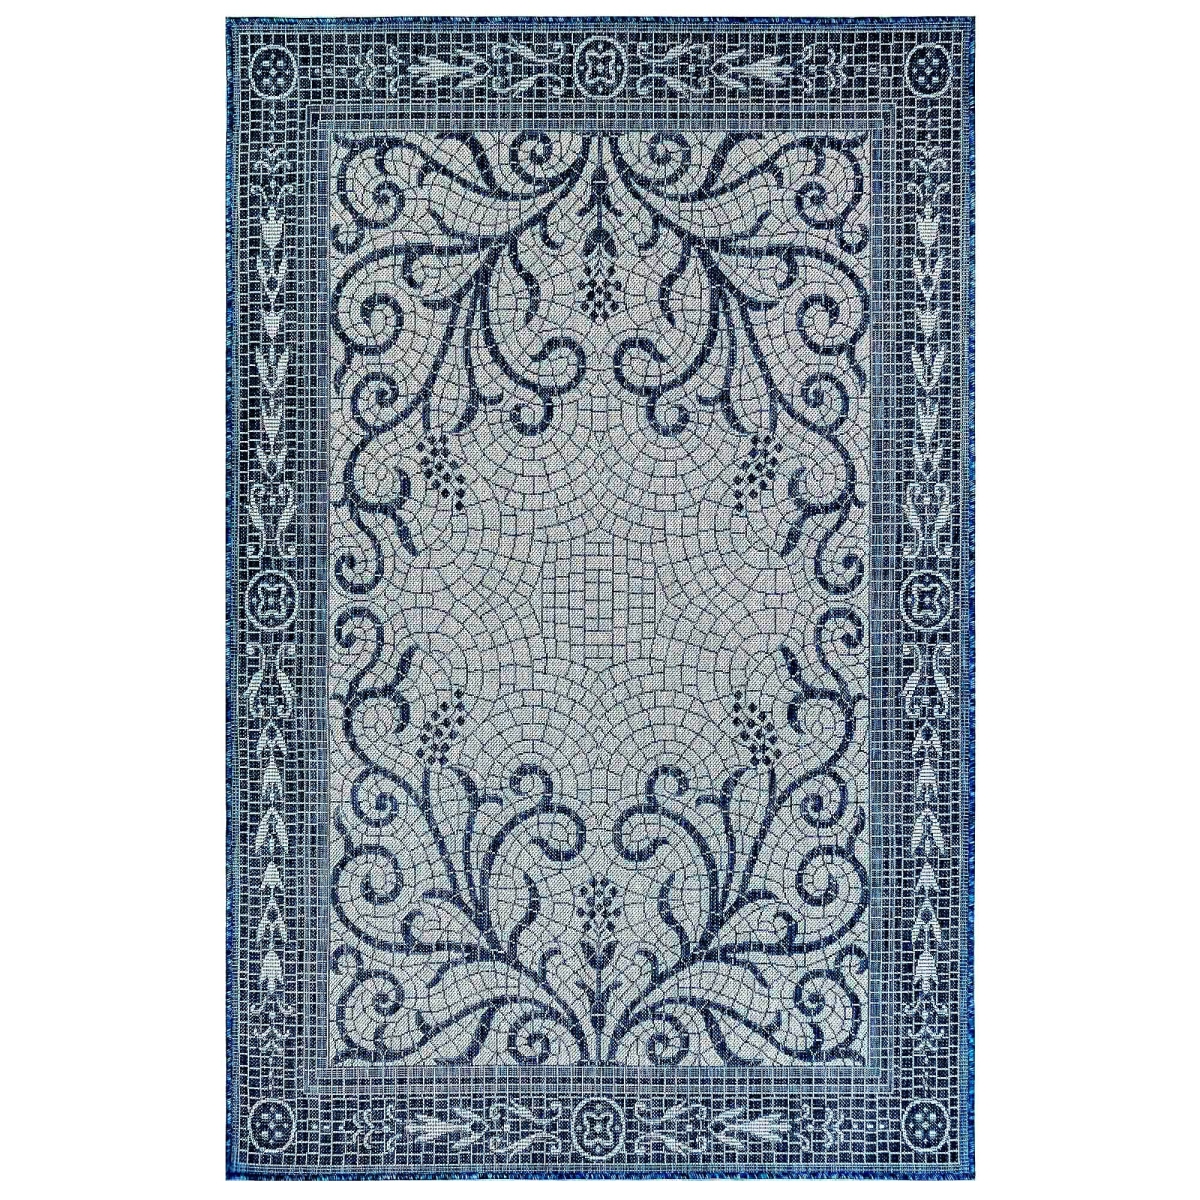 Trans-ocean Imports Cre45842933 39 In. X 59 In. Liora Manne Carmel Mosaic Indoor & Outdoor Wilton Woven Rectangle Rug - Navy